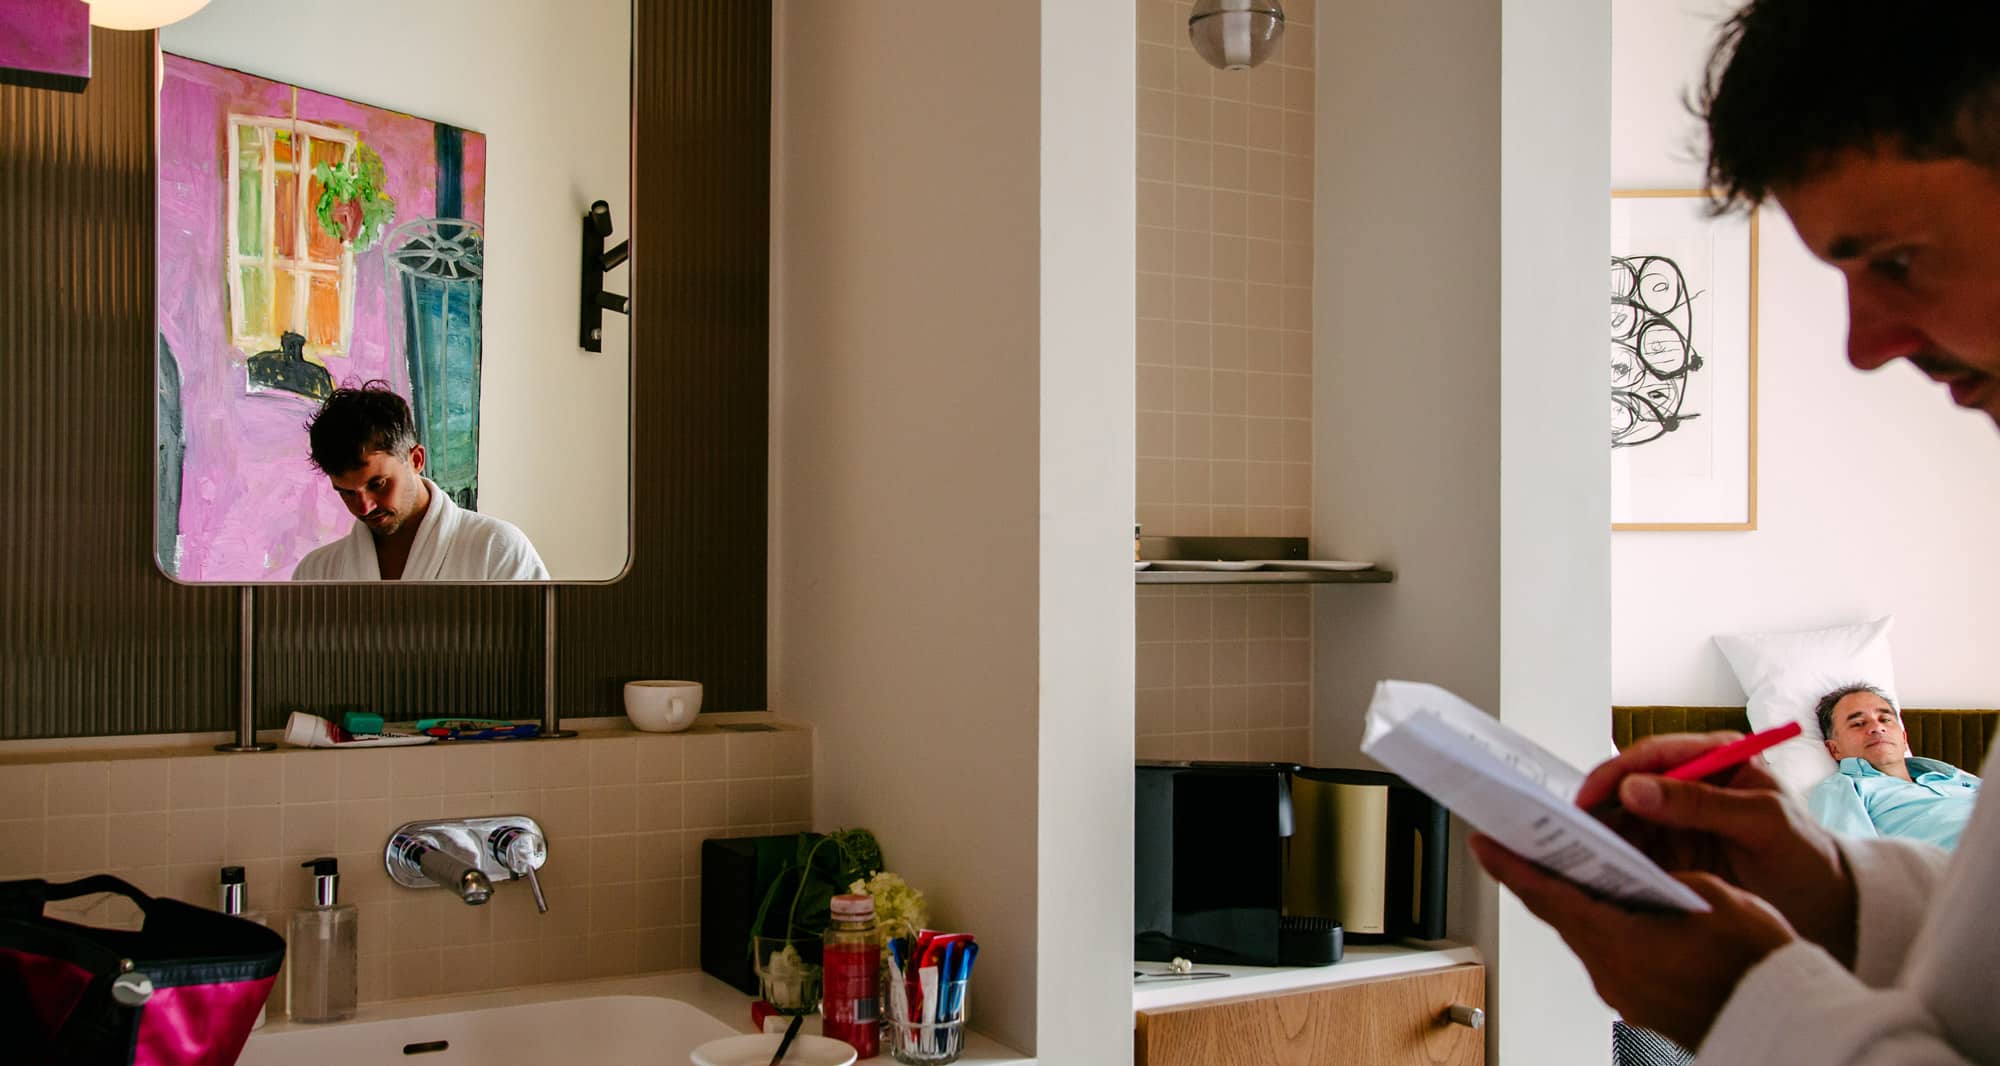 A man immersed in wedding vows, reading a book in a bathroom.